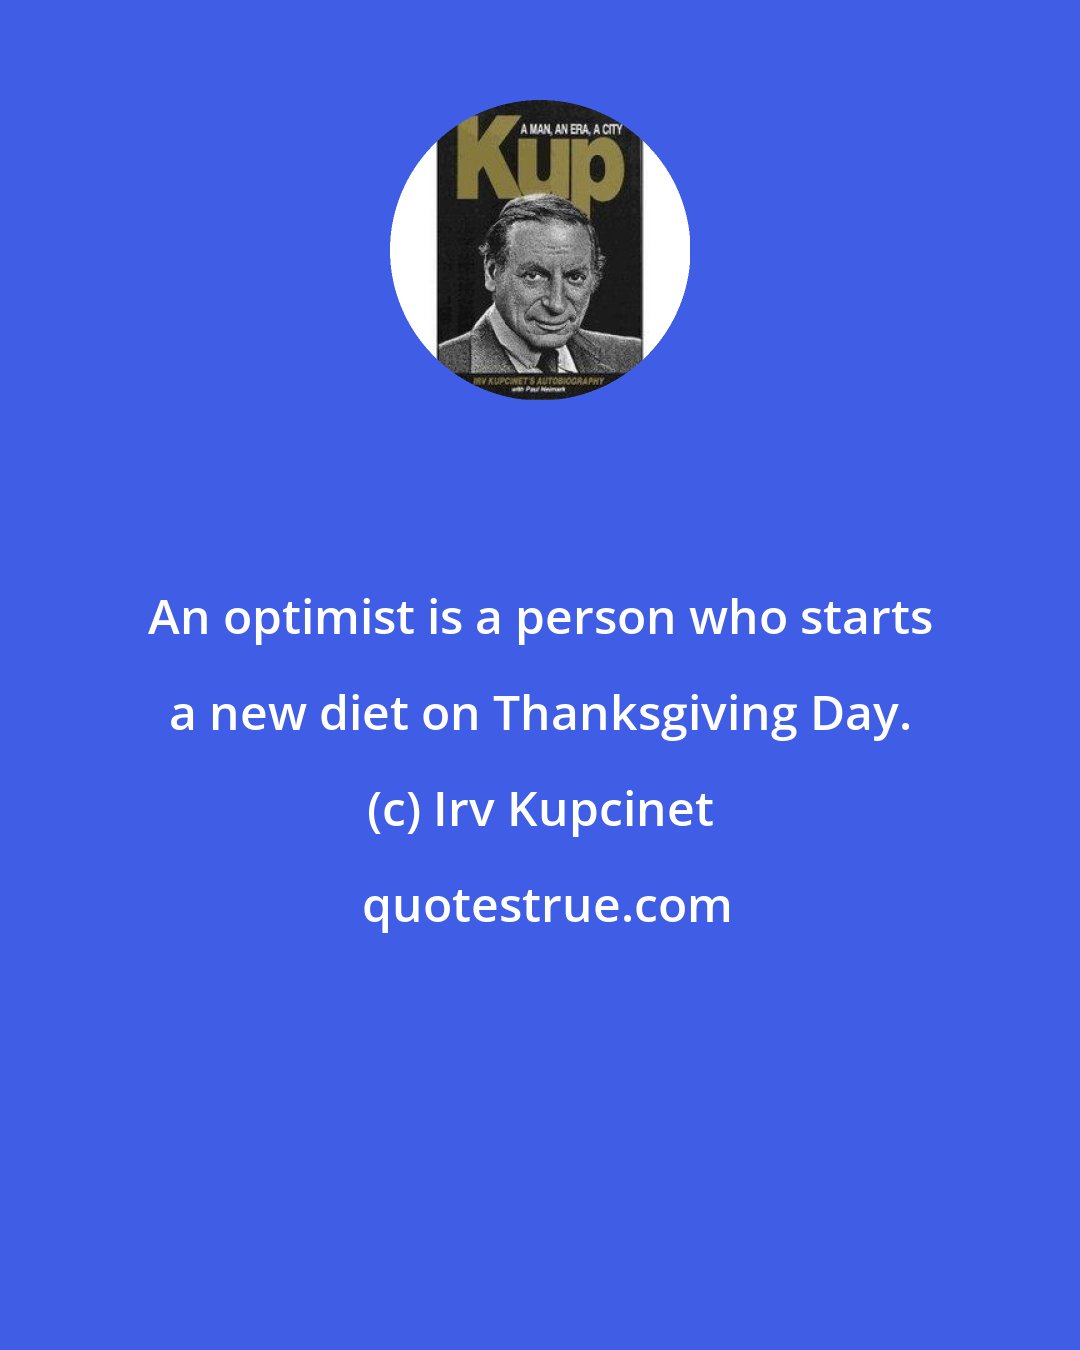 Irv Kupcinet: An optimist is a person who starts a new diet on Thanksgiving Day.